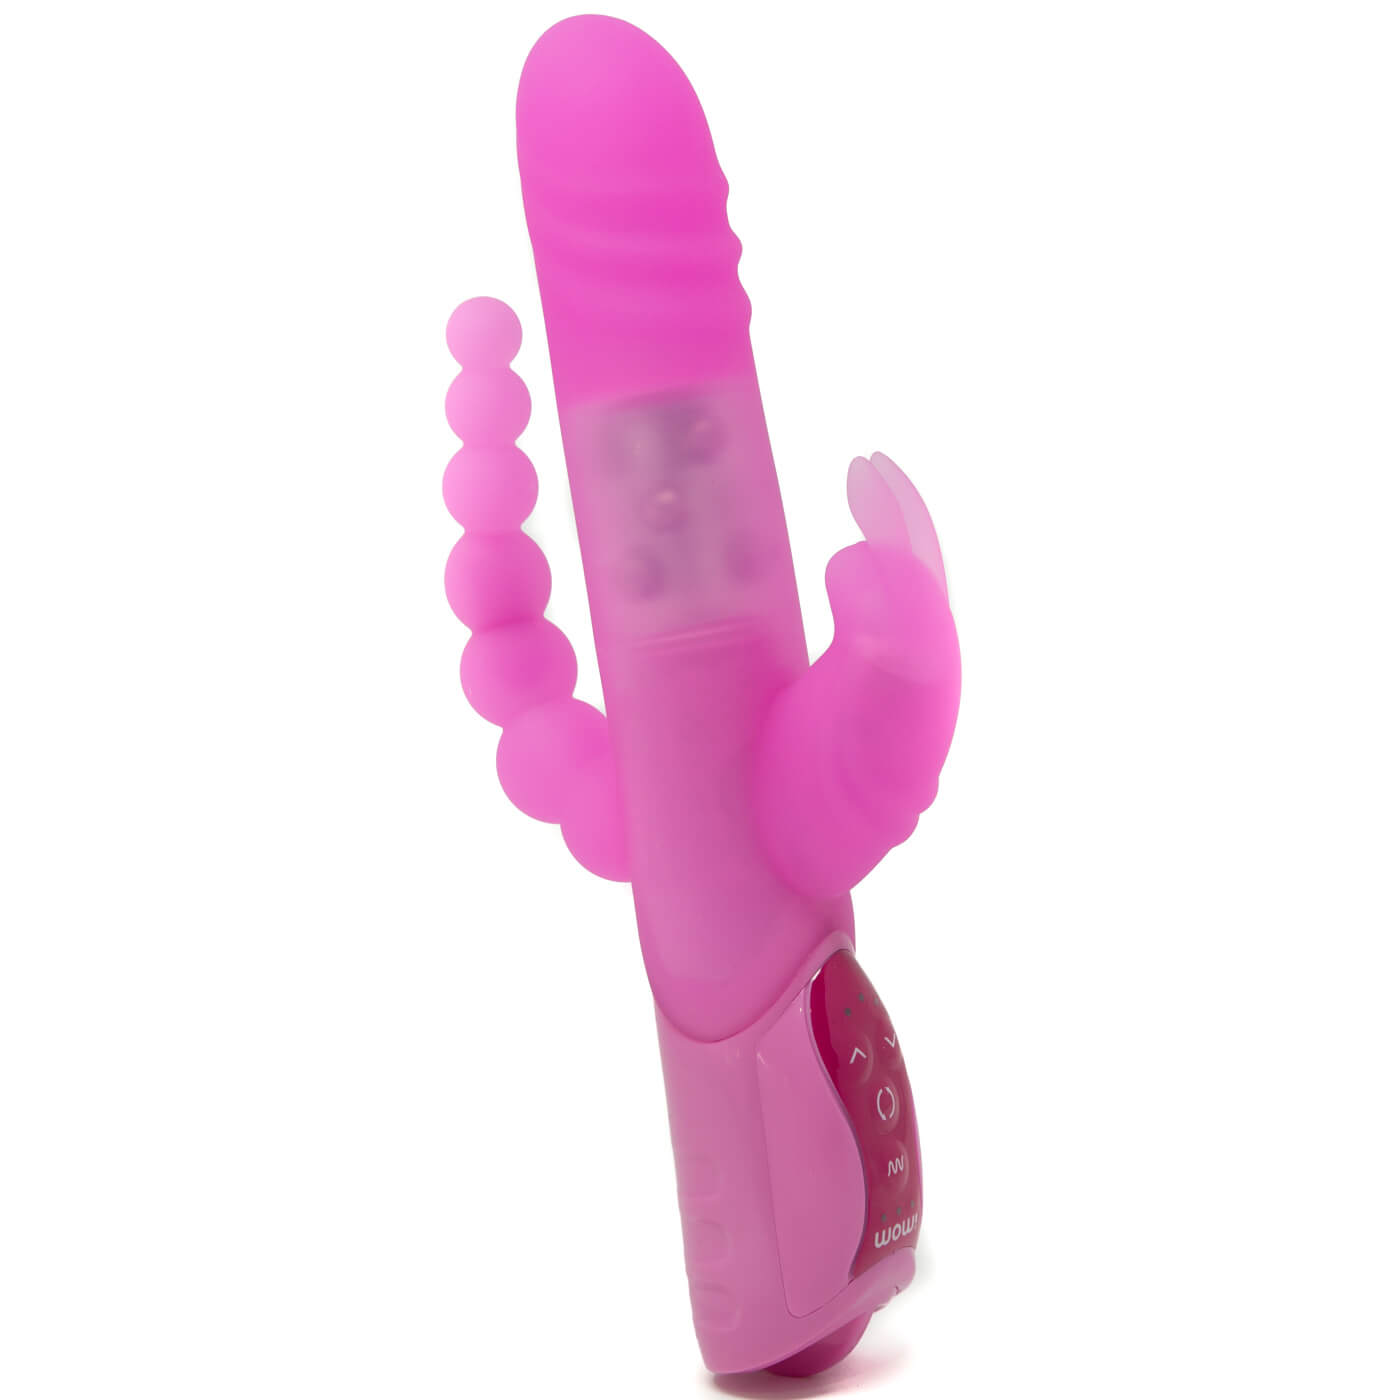 Total Ecstacy 2 Silicone Rabbit Vibrator